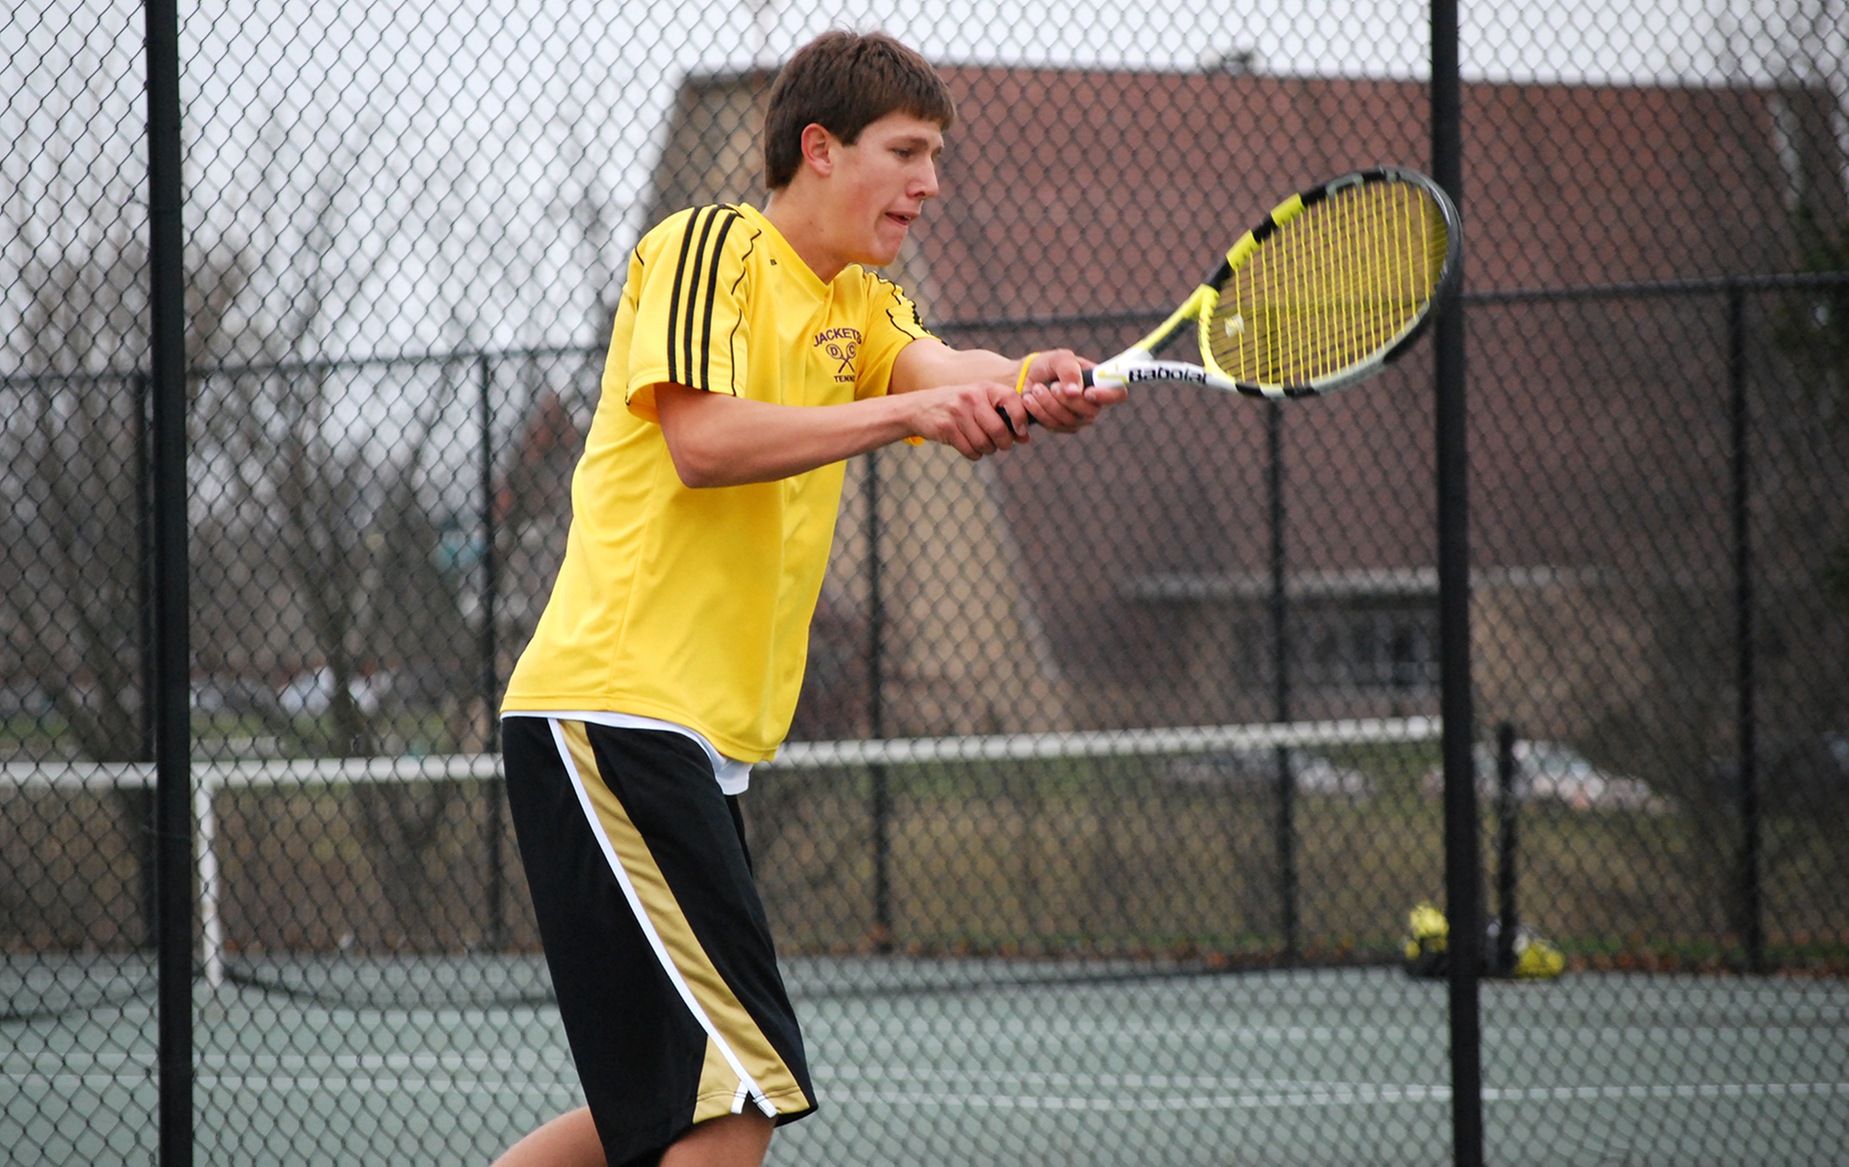 Kleman, Ault and Bratton Stay Unbeaten in HCAC Play